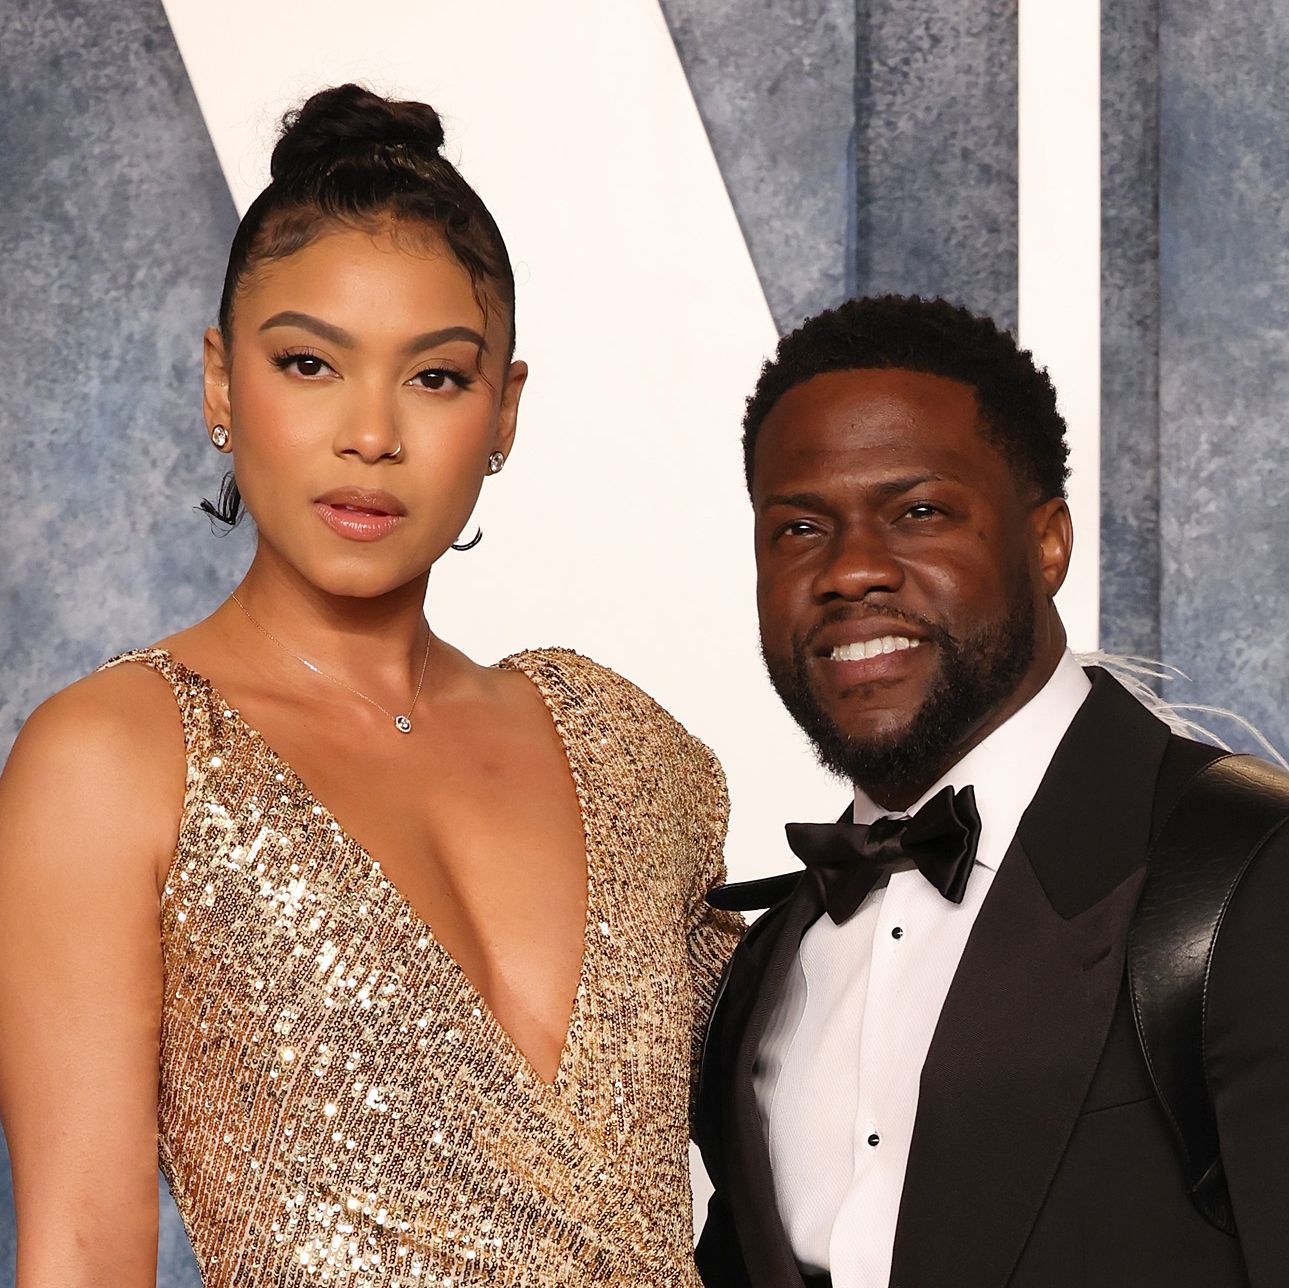 Kevin Hart's Wife, Eniko Parrish, Stood Right by Her Husband's Side After His Terrifying Car Crash